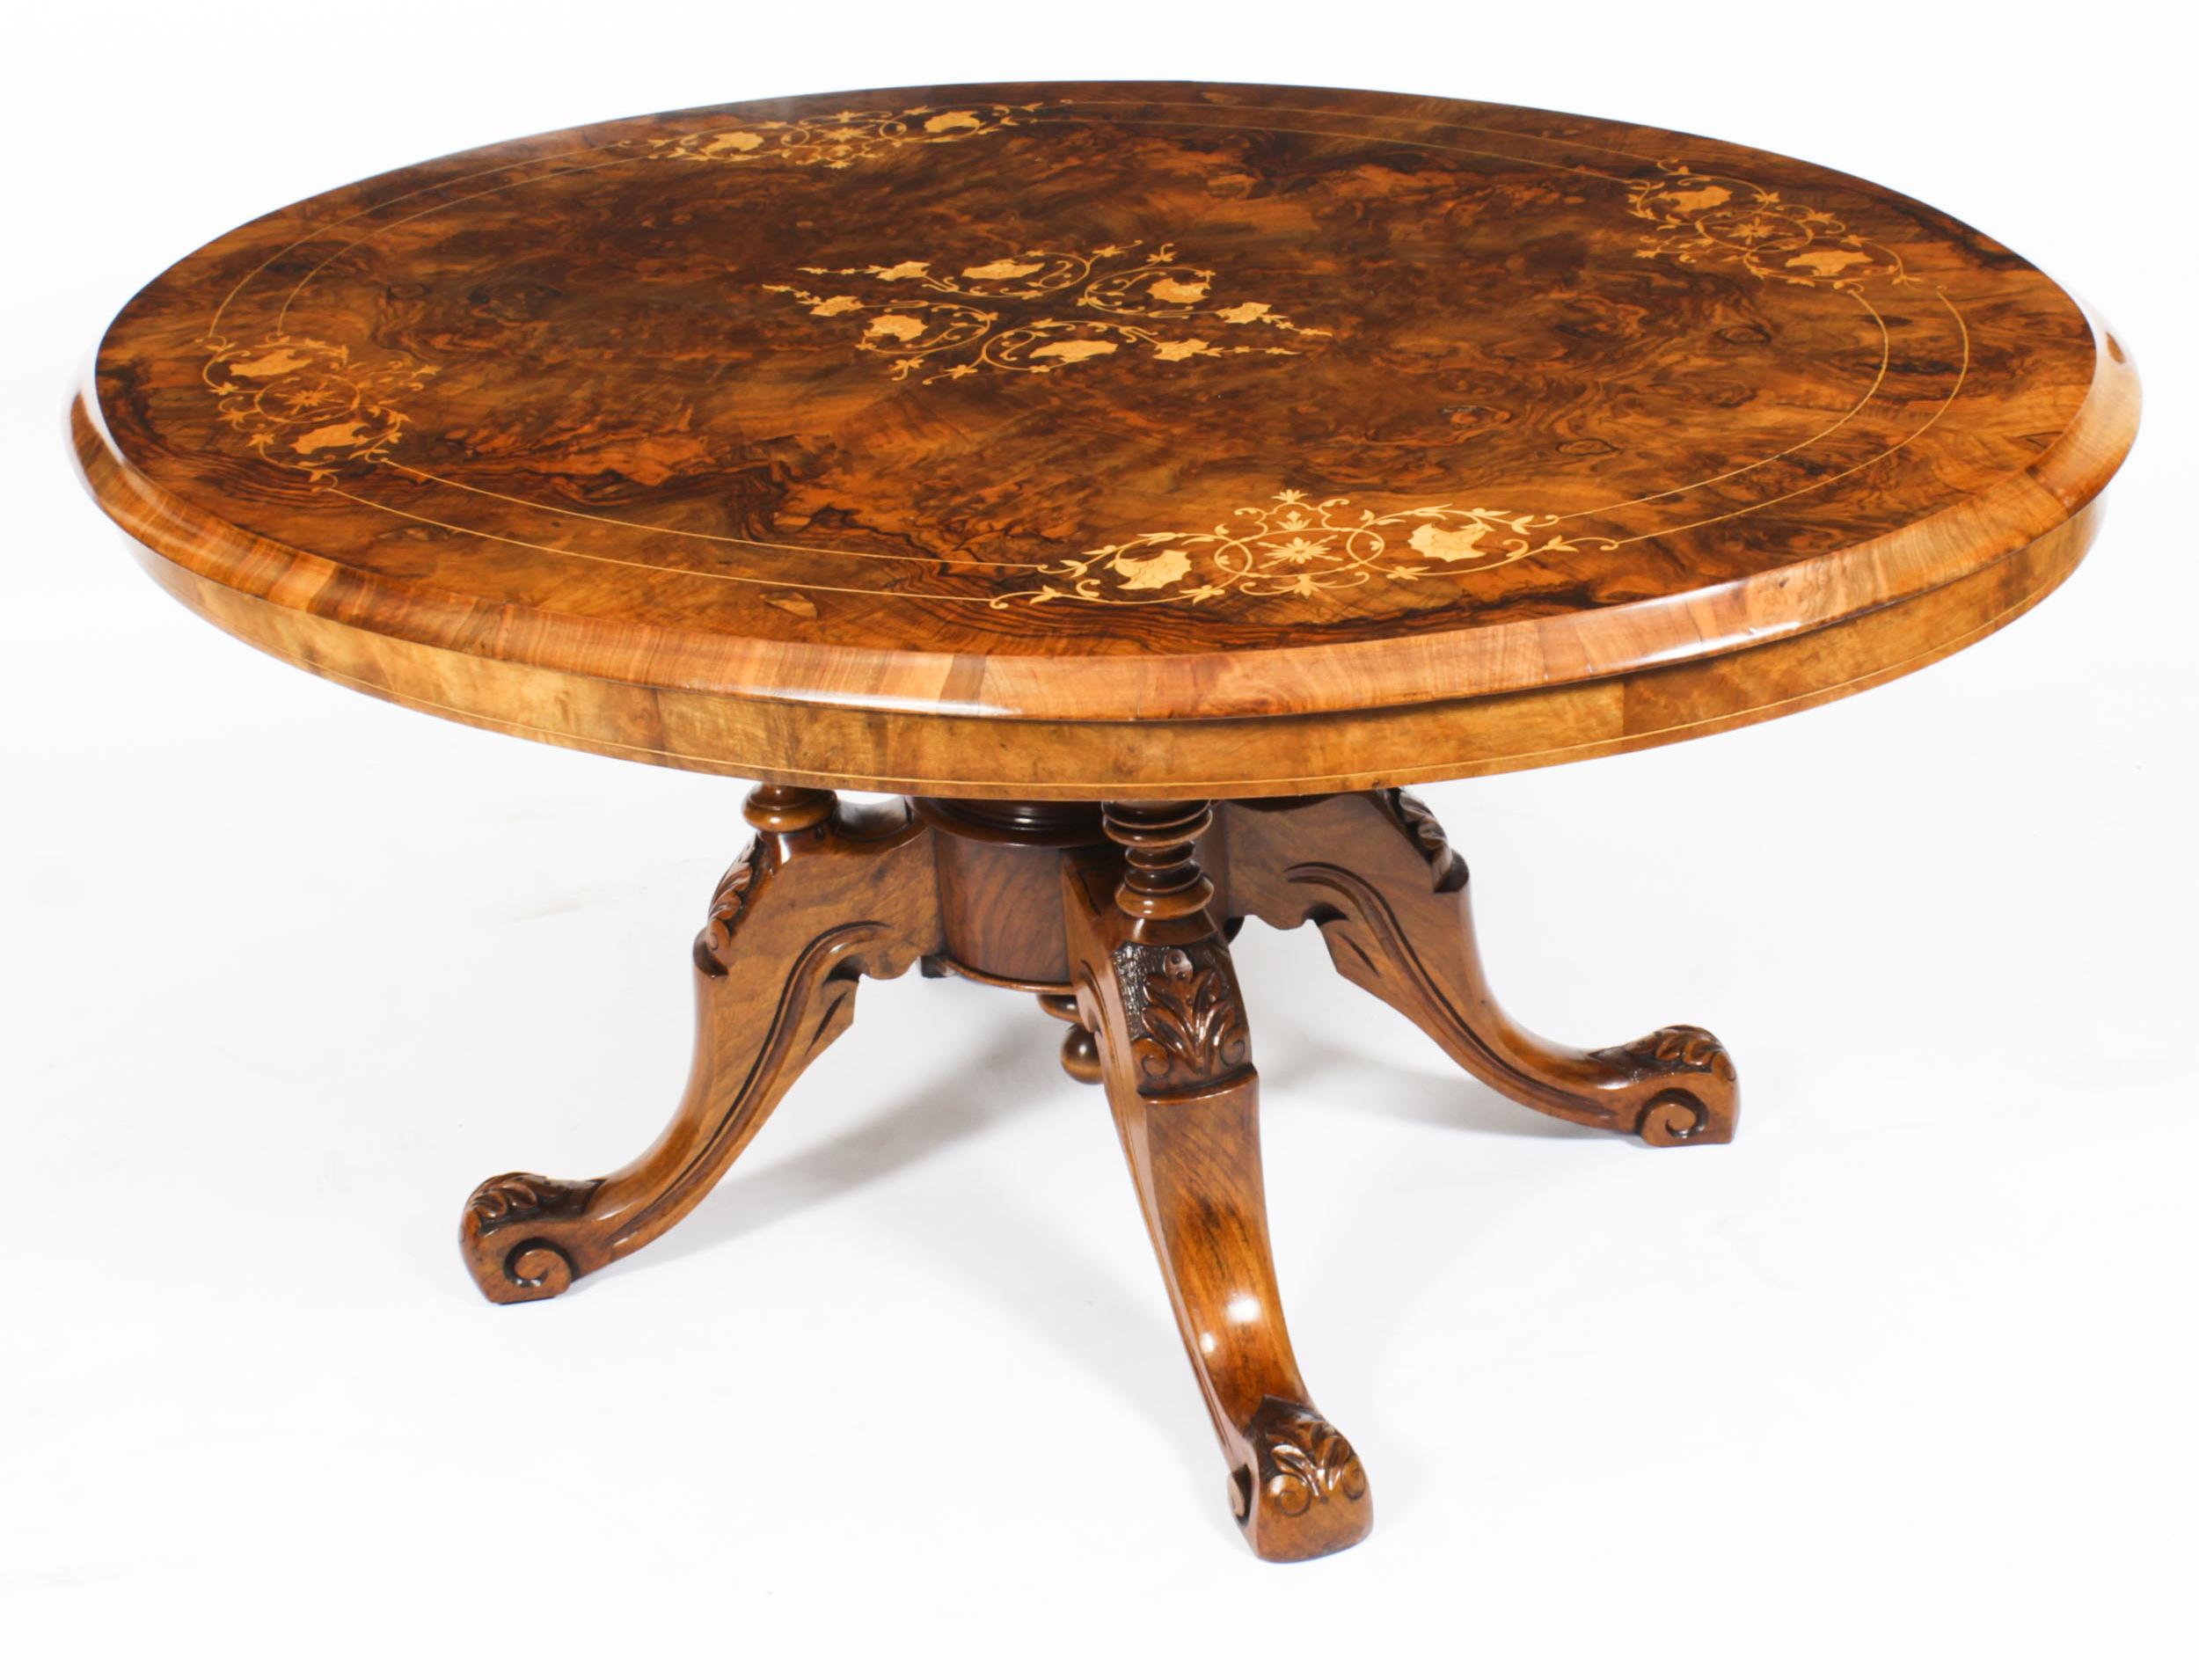 This is a lovely antique Victorian burr walnut and marquetry coffee table, circa 1860 in date
 
The oval table top features beautiful inlaid marquetry decoration in a beautifully figured ‘mirrored’ walnut veneer.
 
The base has been hand carved